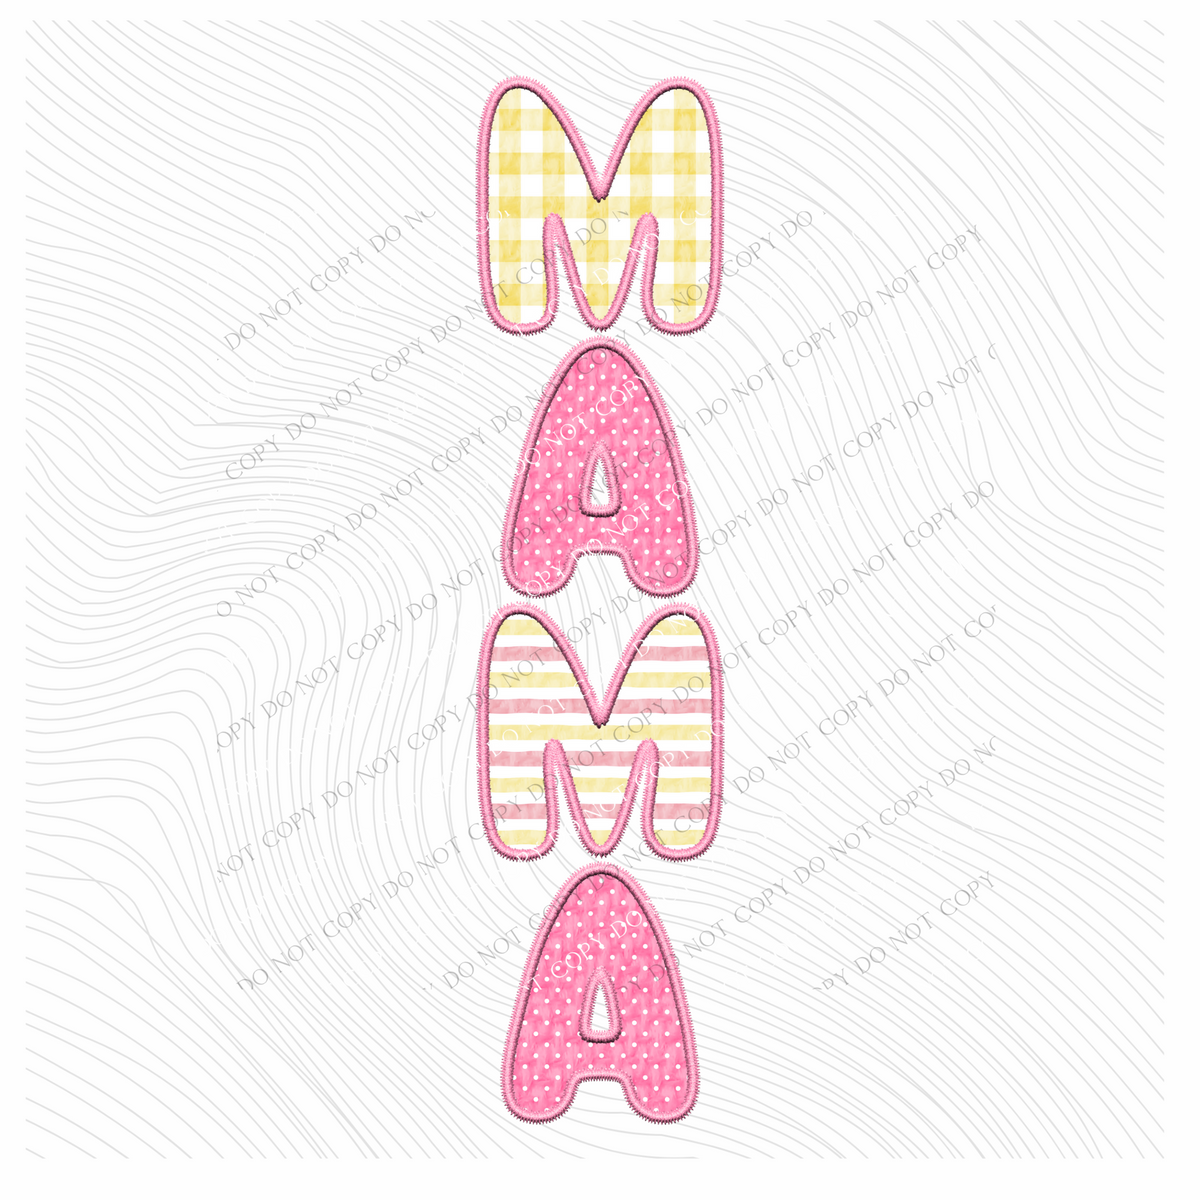 Mama Embroidery Gingham, Dots & Stripes Textured Vertical in Pink & Yellow Digital Design, PNG